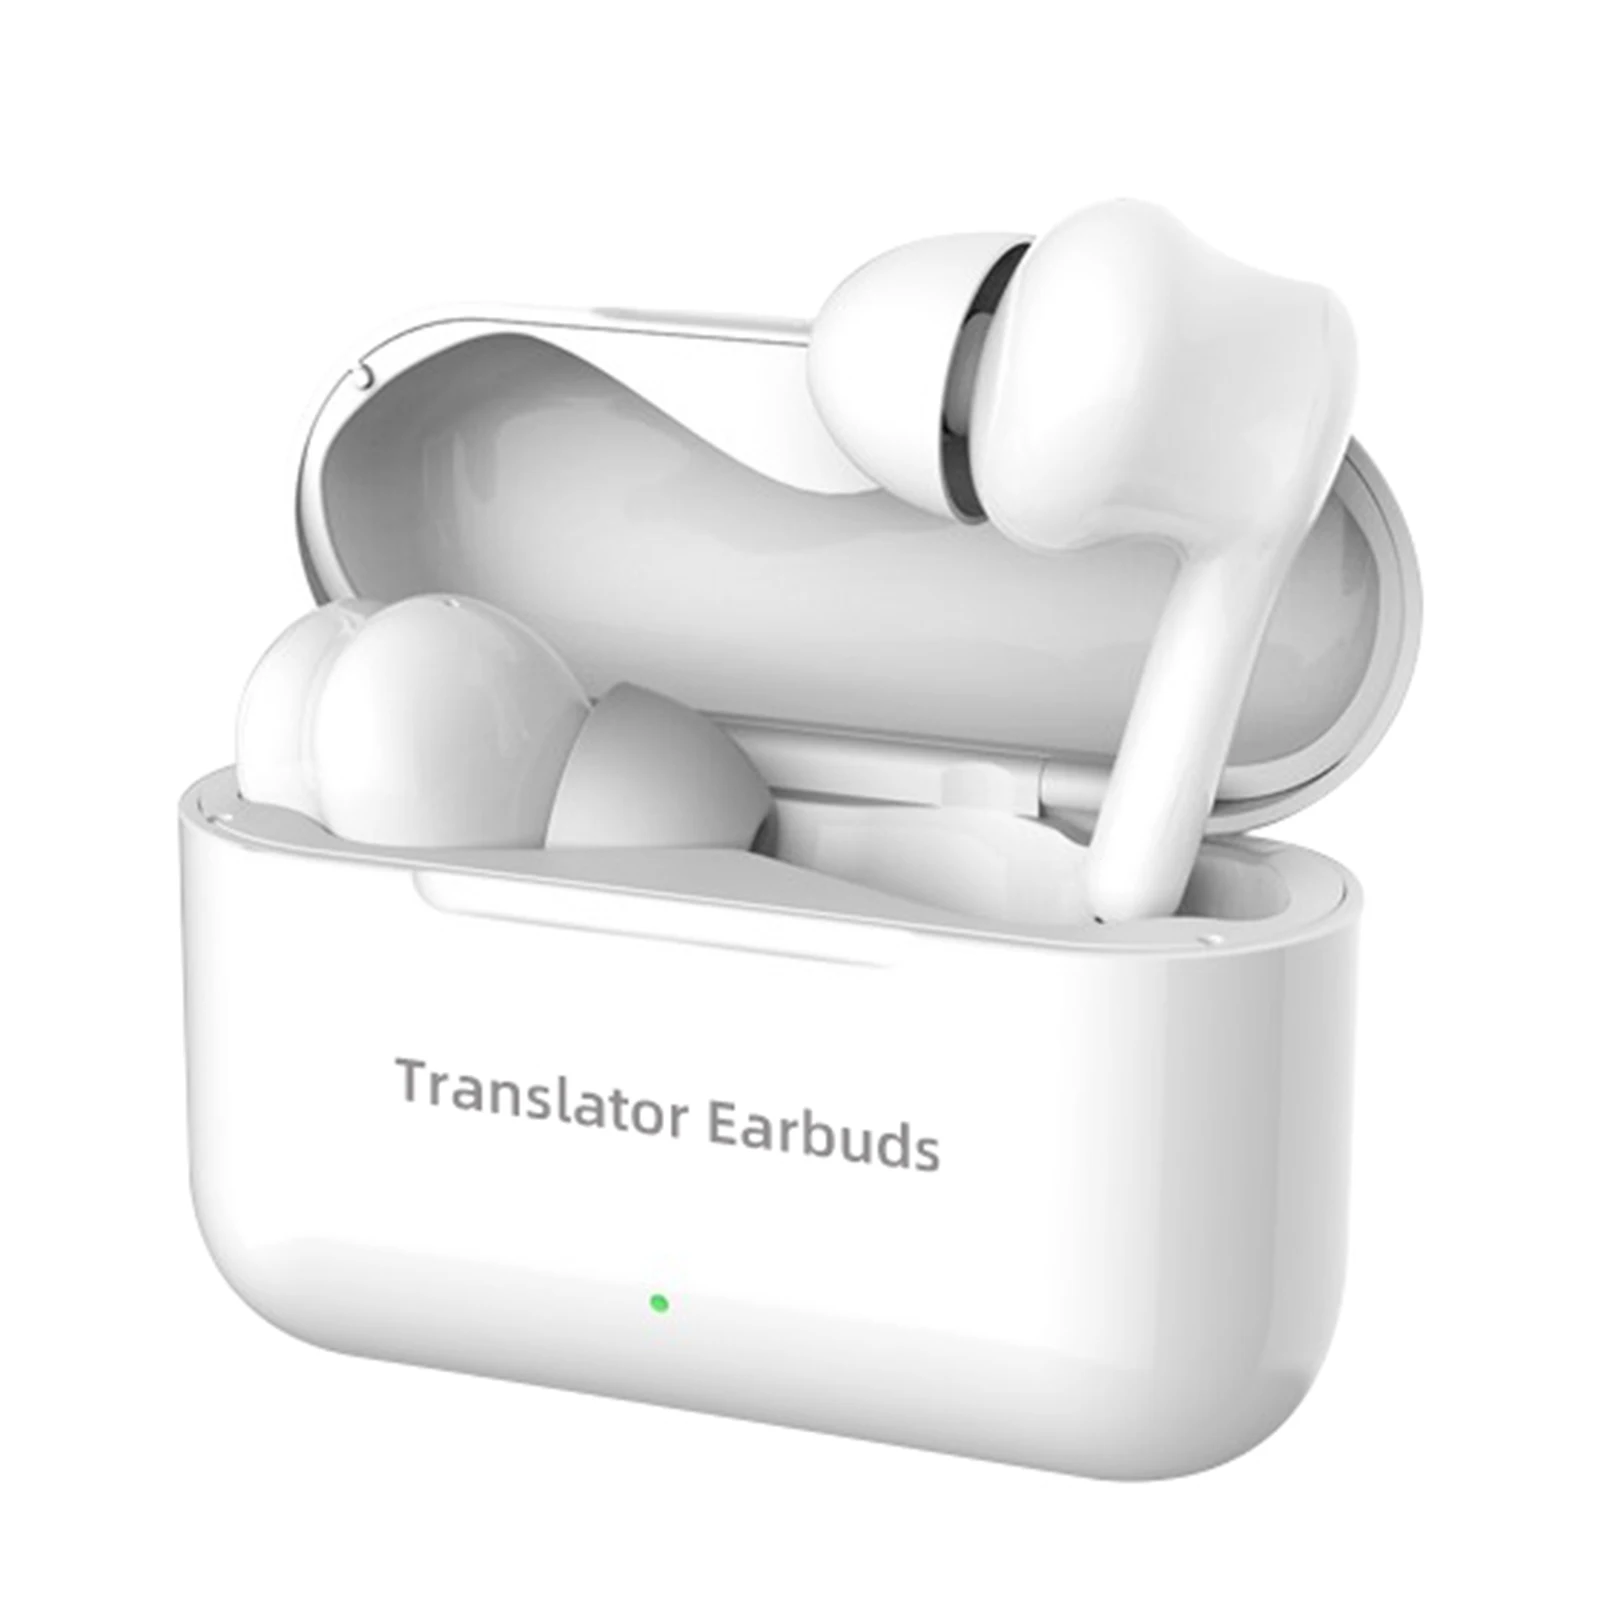 

Wireless BT Headphones Translator Earbuds with Microphones Support Real-time Translation in 71 Languages 56 Accents Online